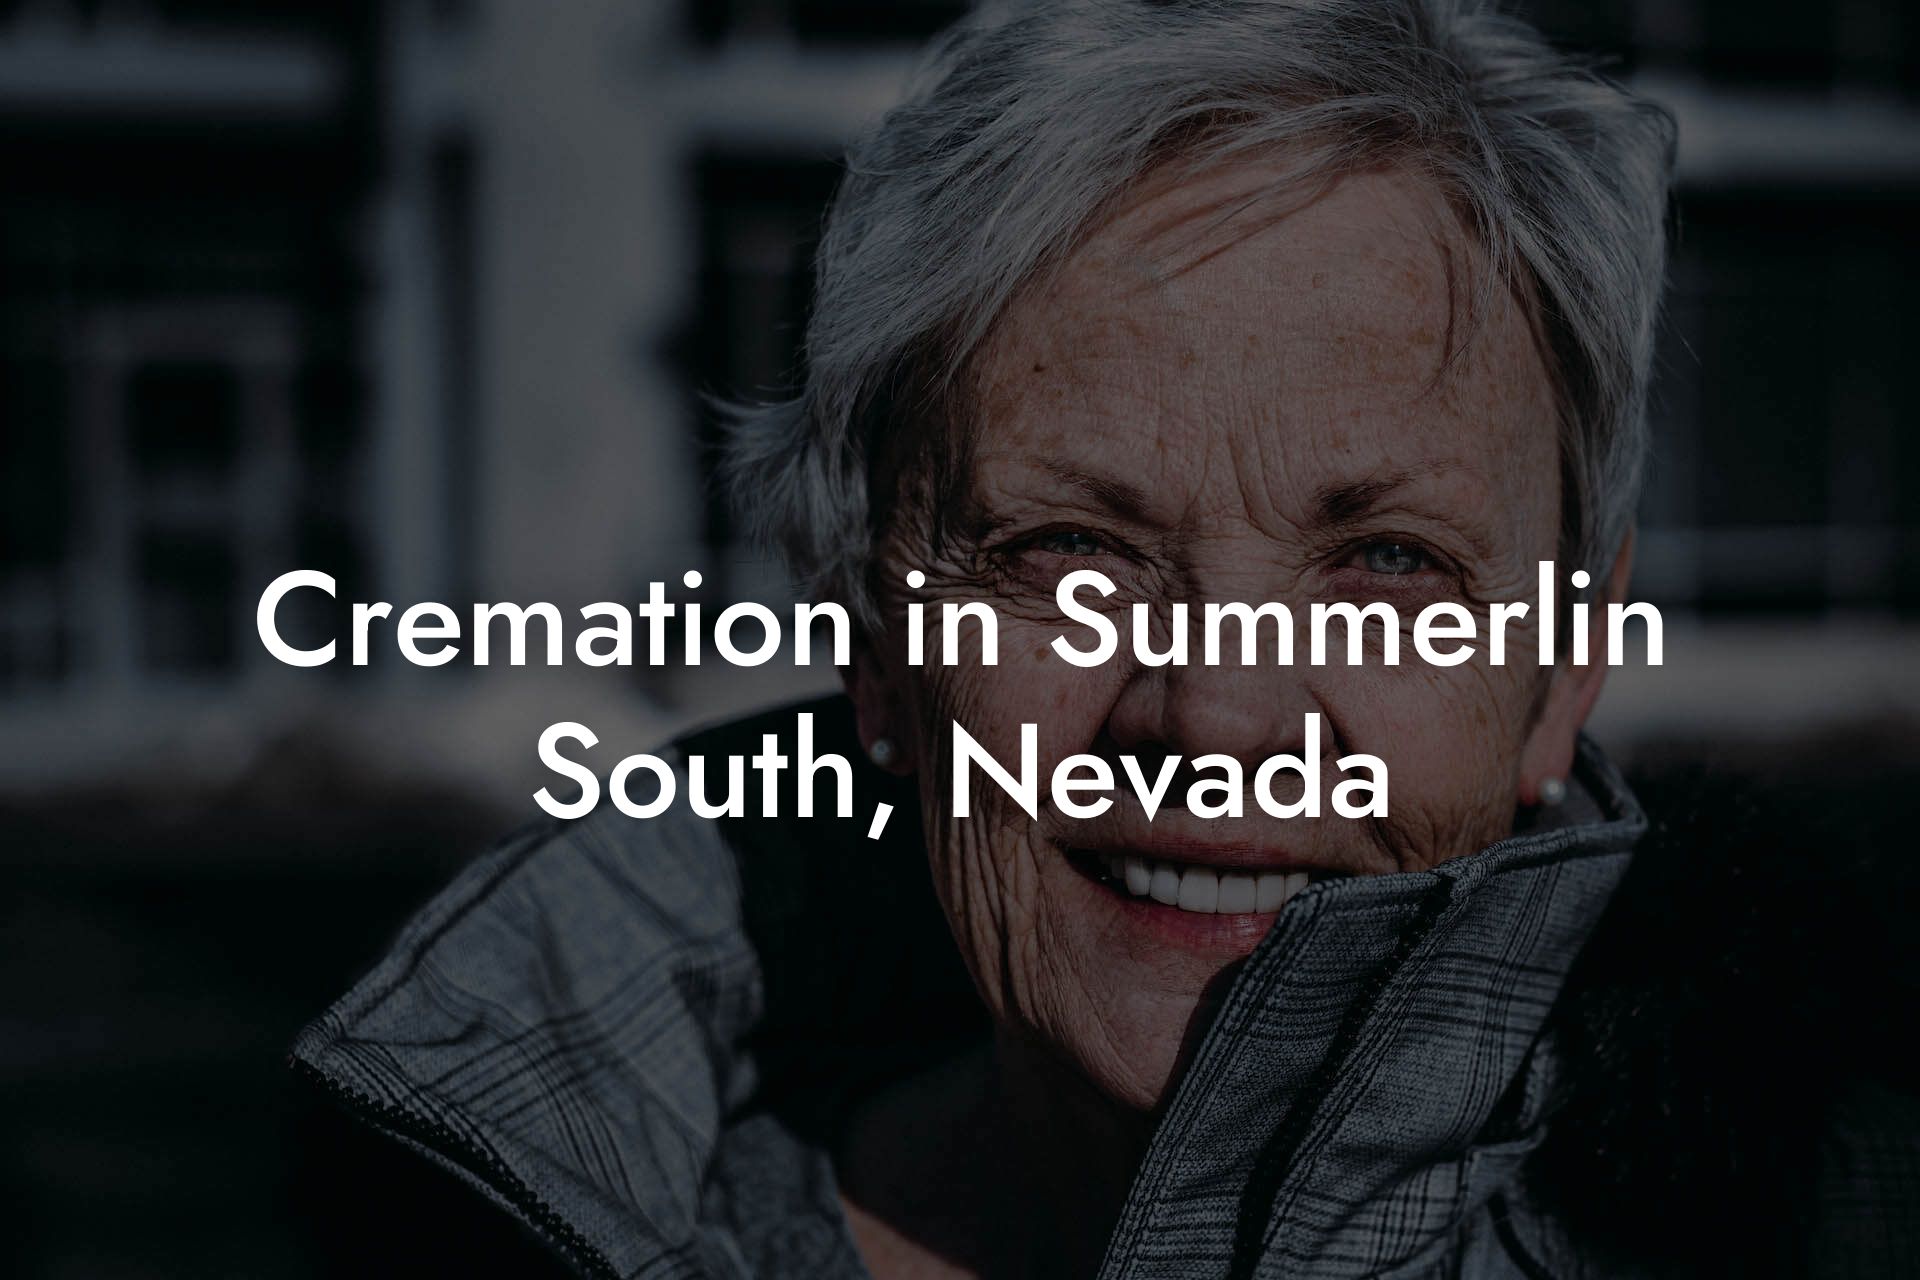 Cremation in Summerlin South, Nevada